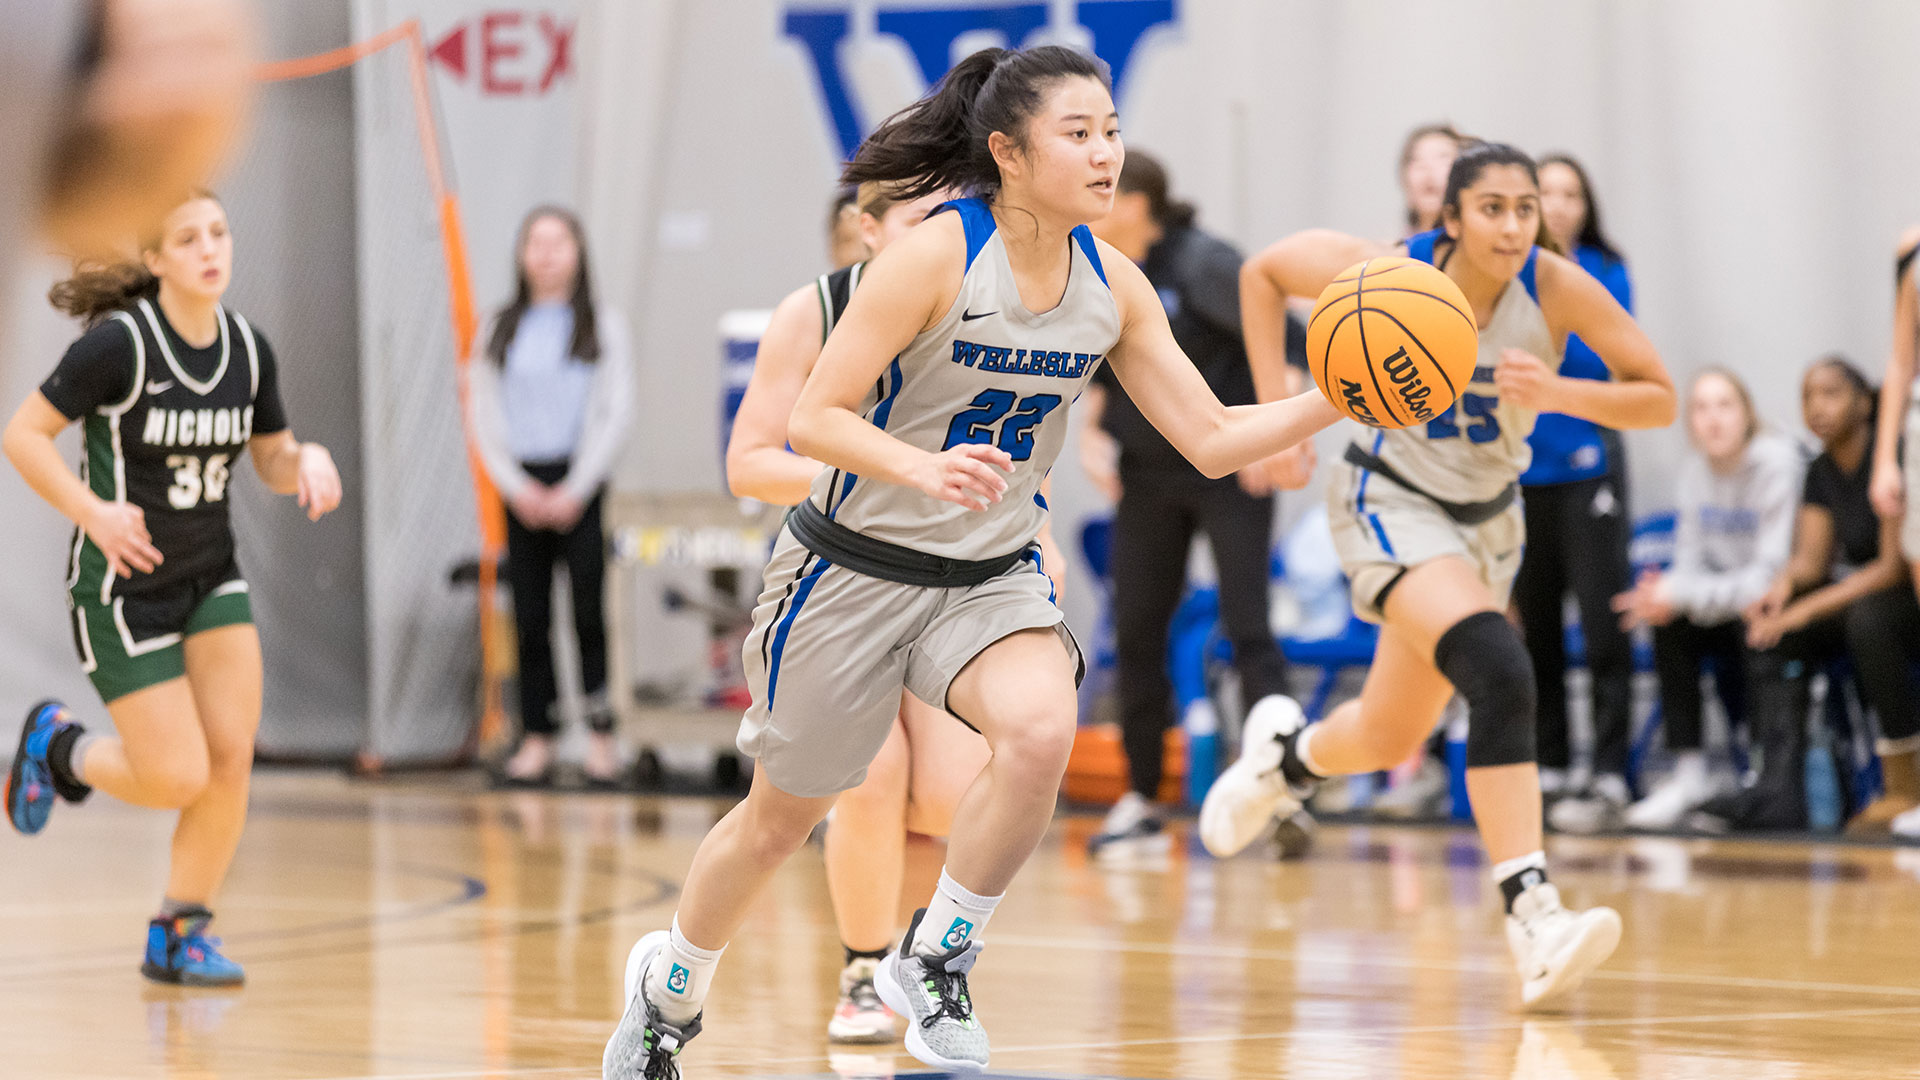 Chae Scores 20 as Blue Basketball Falls to SUNY Canton, 47-40